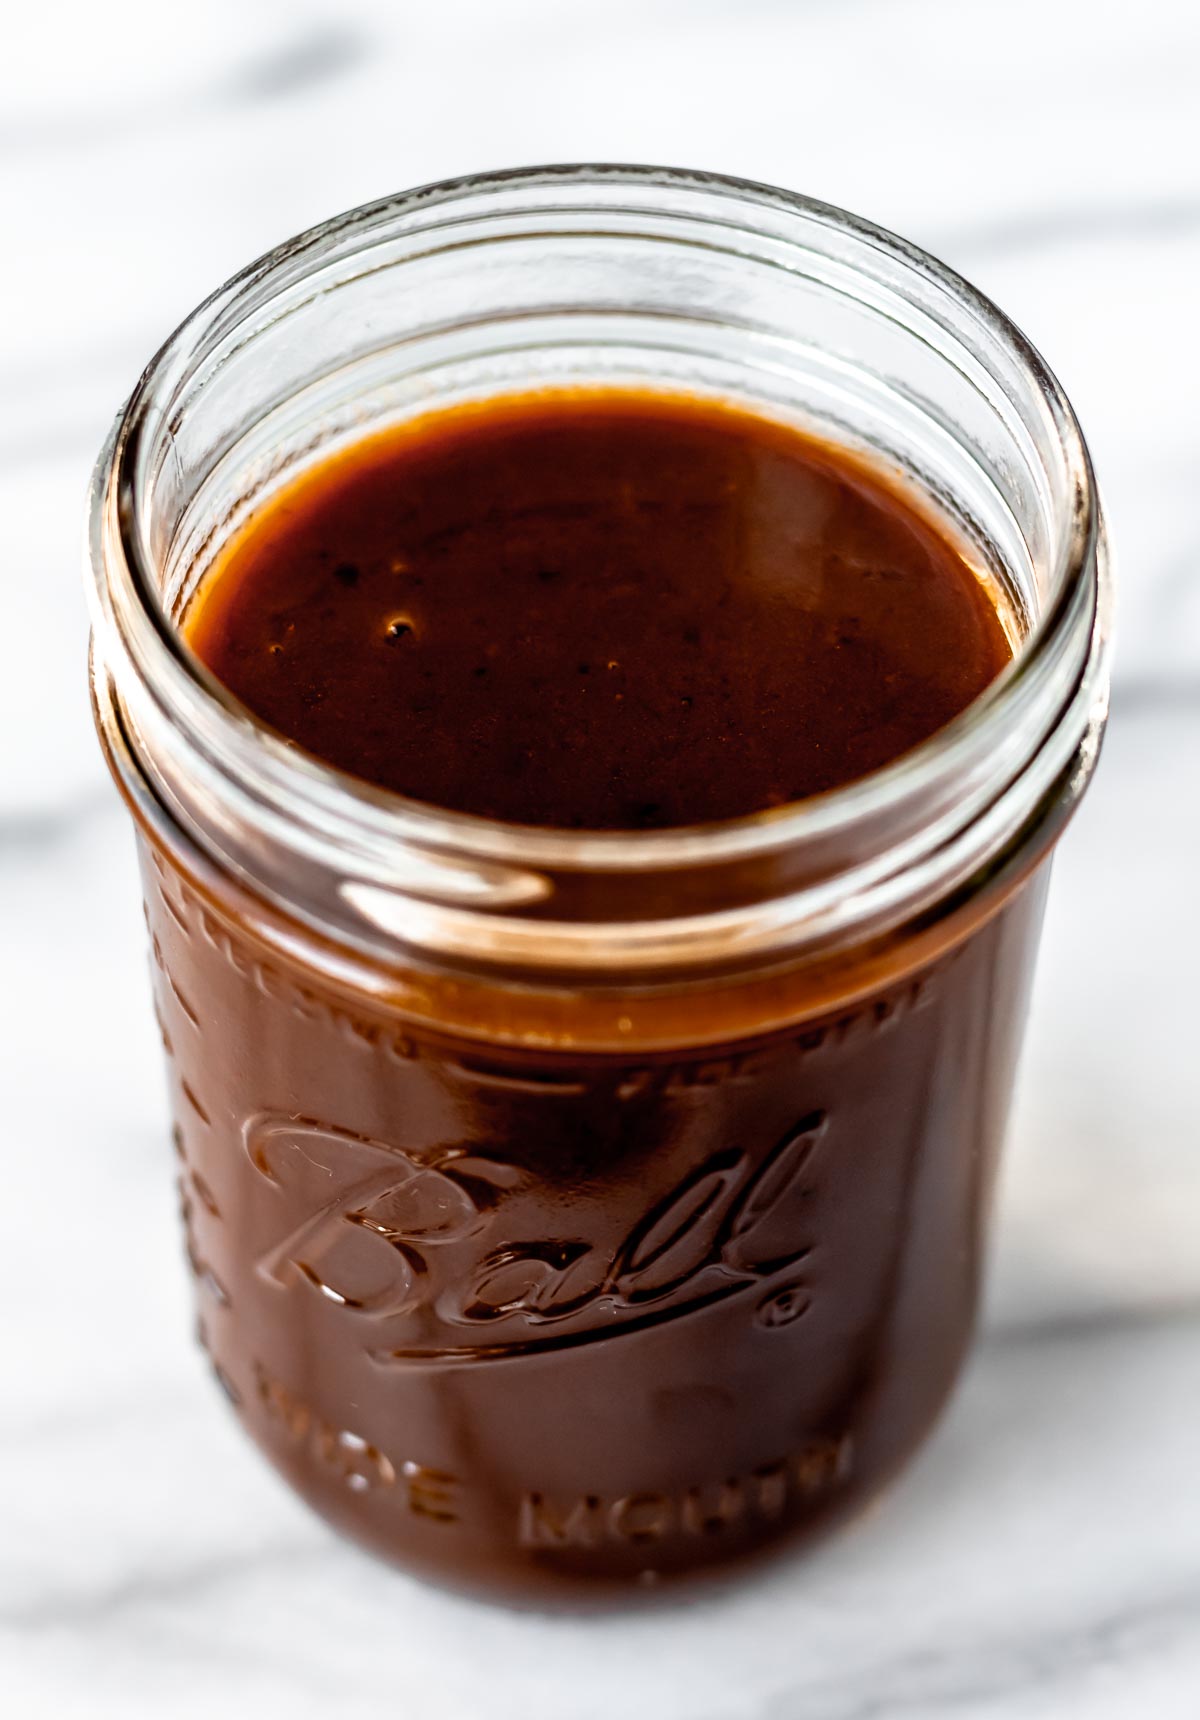 Demi-glace in a glass canning jar.